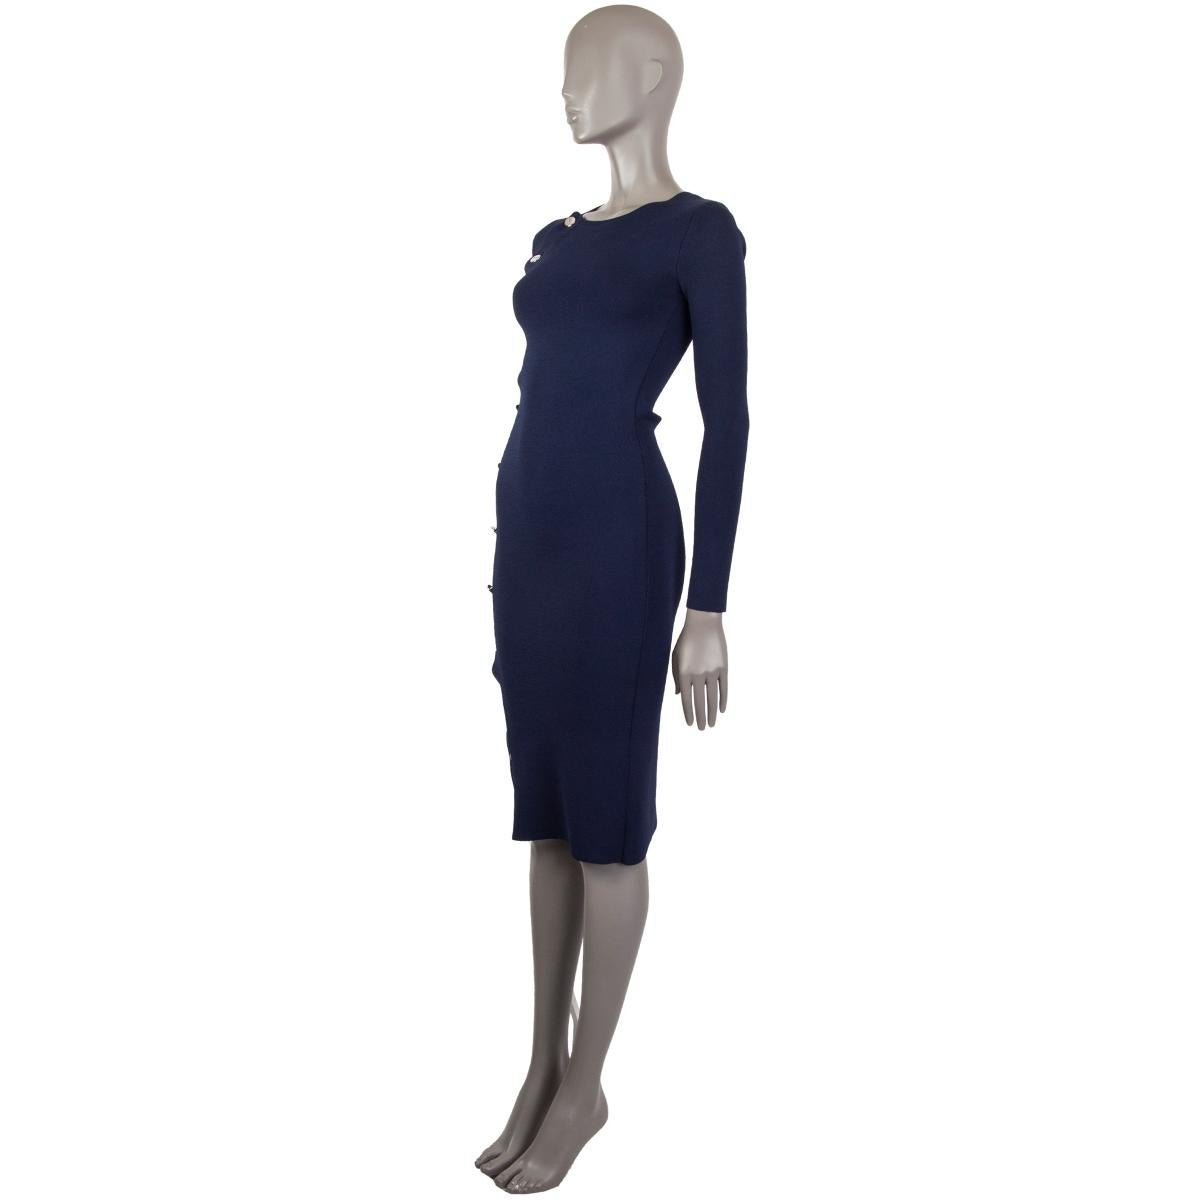 100% authentic Altuzarra side button dress in midnight blue viscose (63%) nylon (37%) with a close fitted silhouette, detailed with a row of high shine buttons, jewel neck, long sleeves to slip on. Unlined. Has been worn and is in